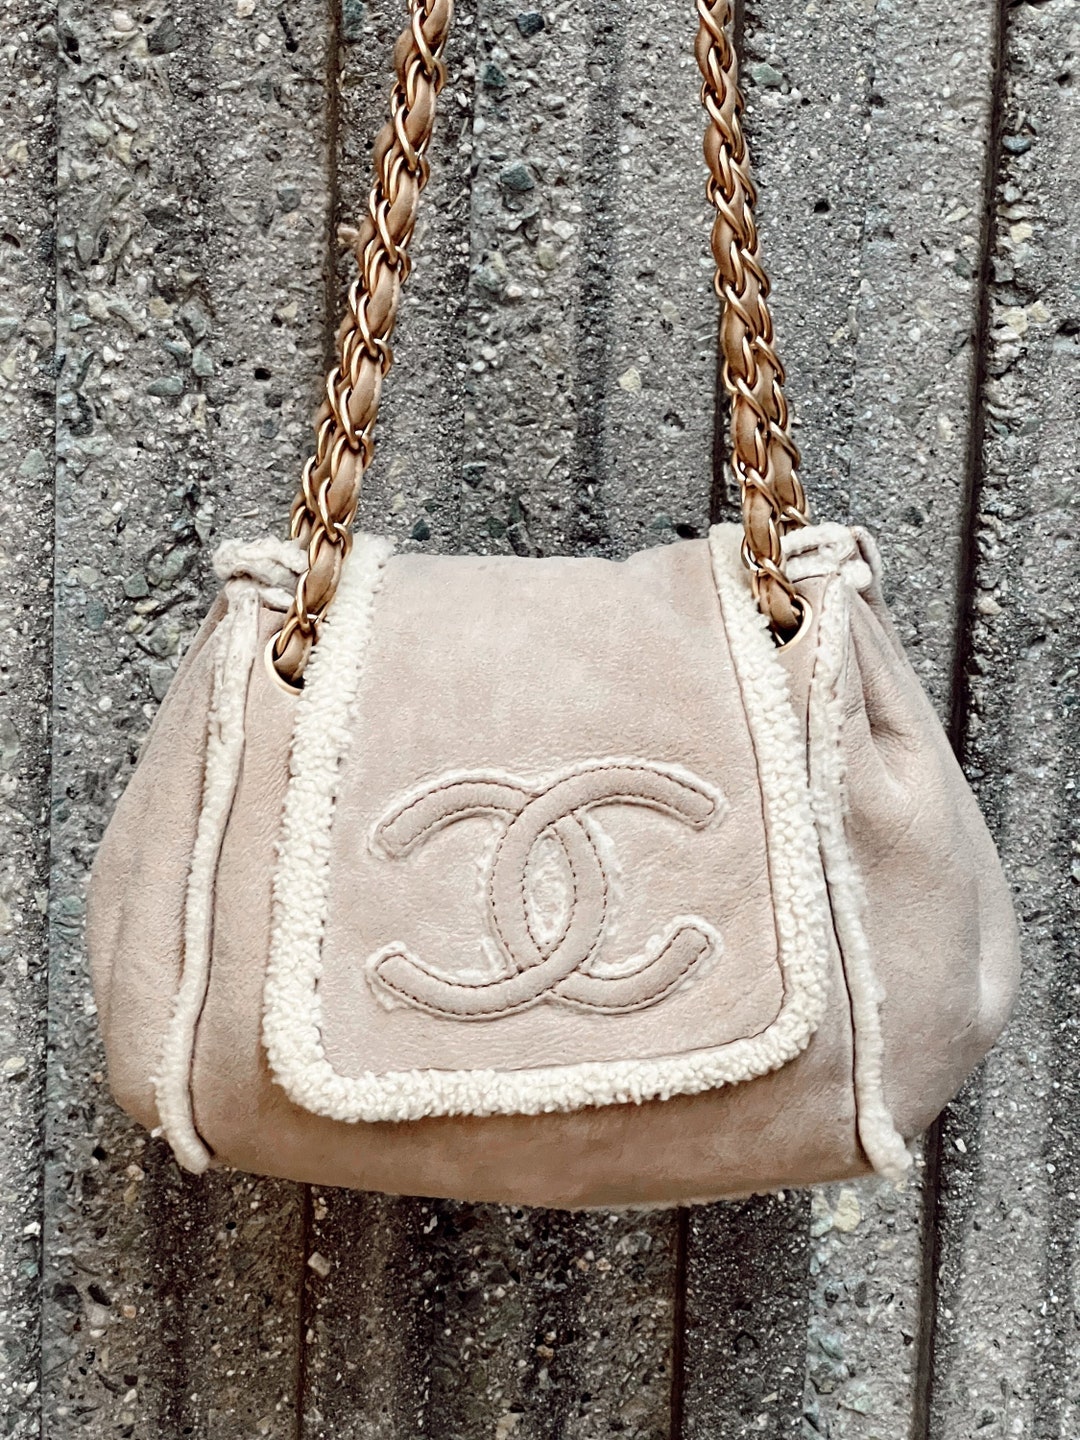 Timeless/classique crossbody bag Chanel Beige in Suede - 36889693